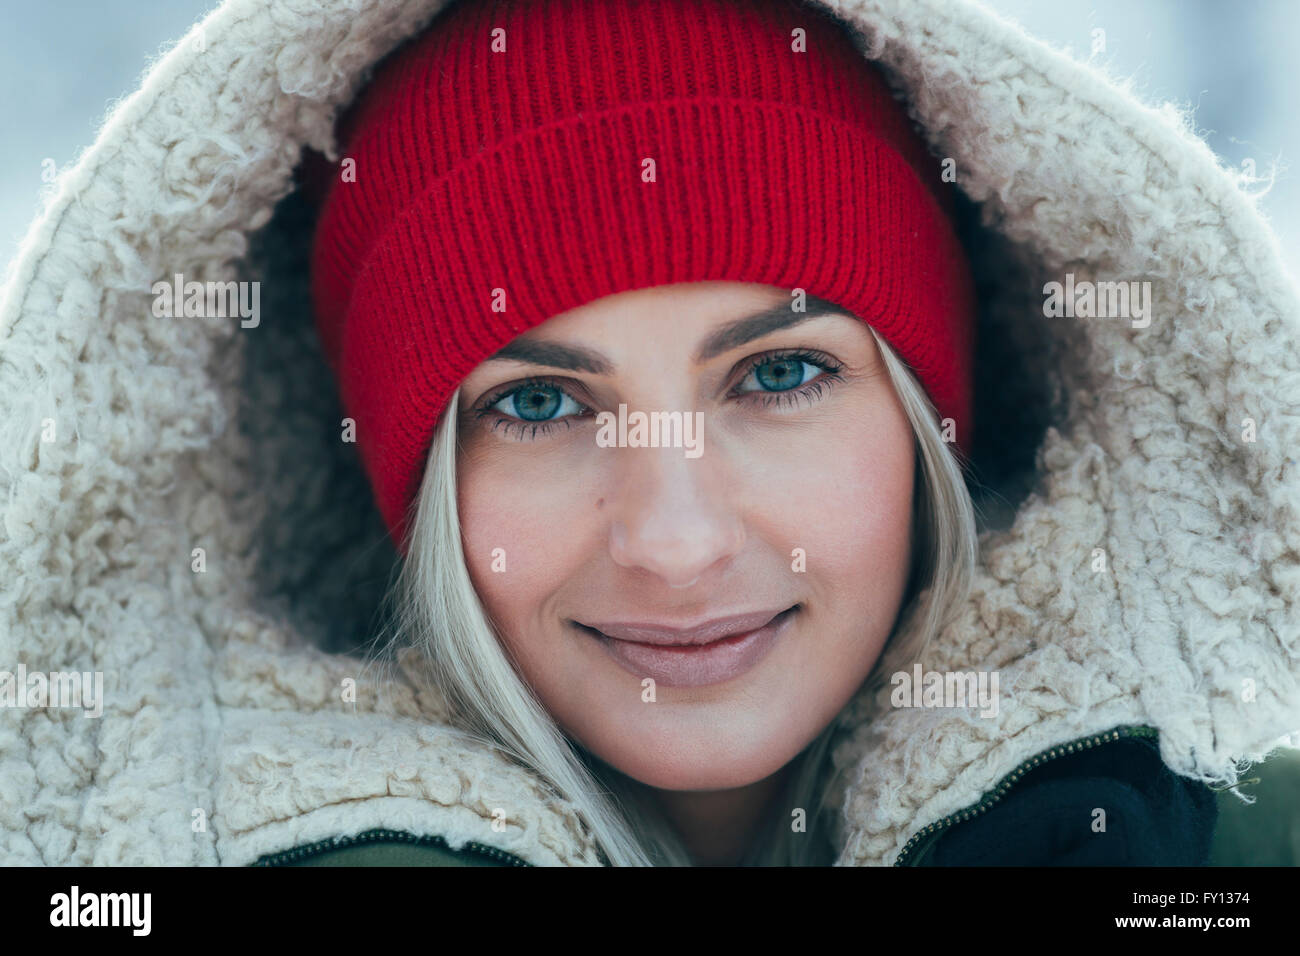 Close-up portrait of beautiful young woman wearing hood Banque D'Images